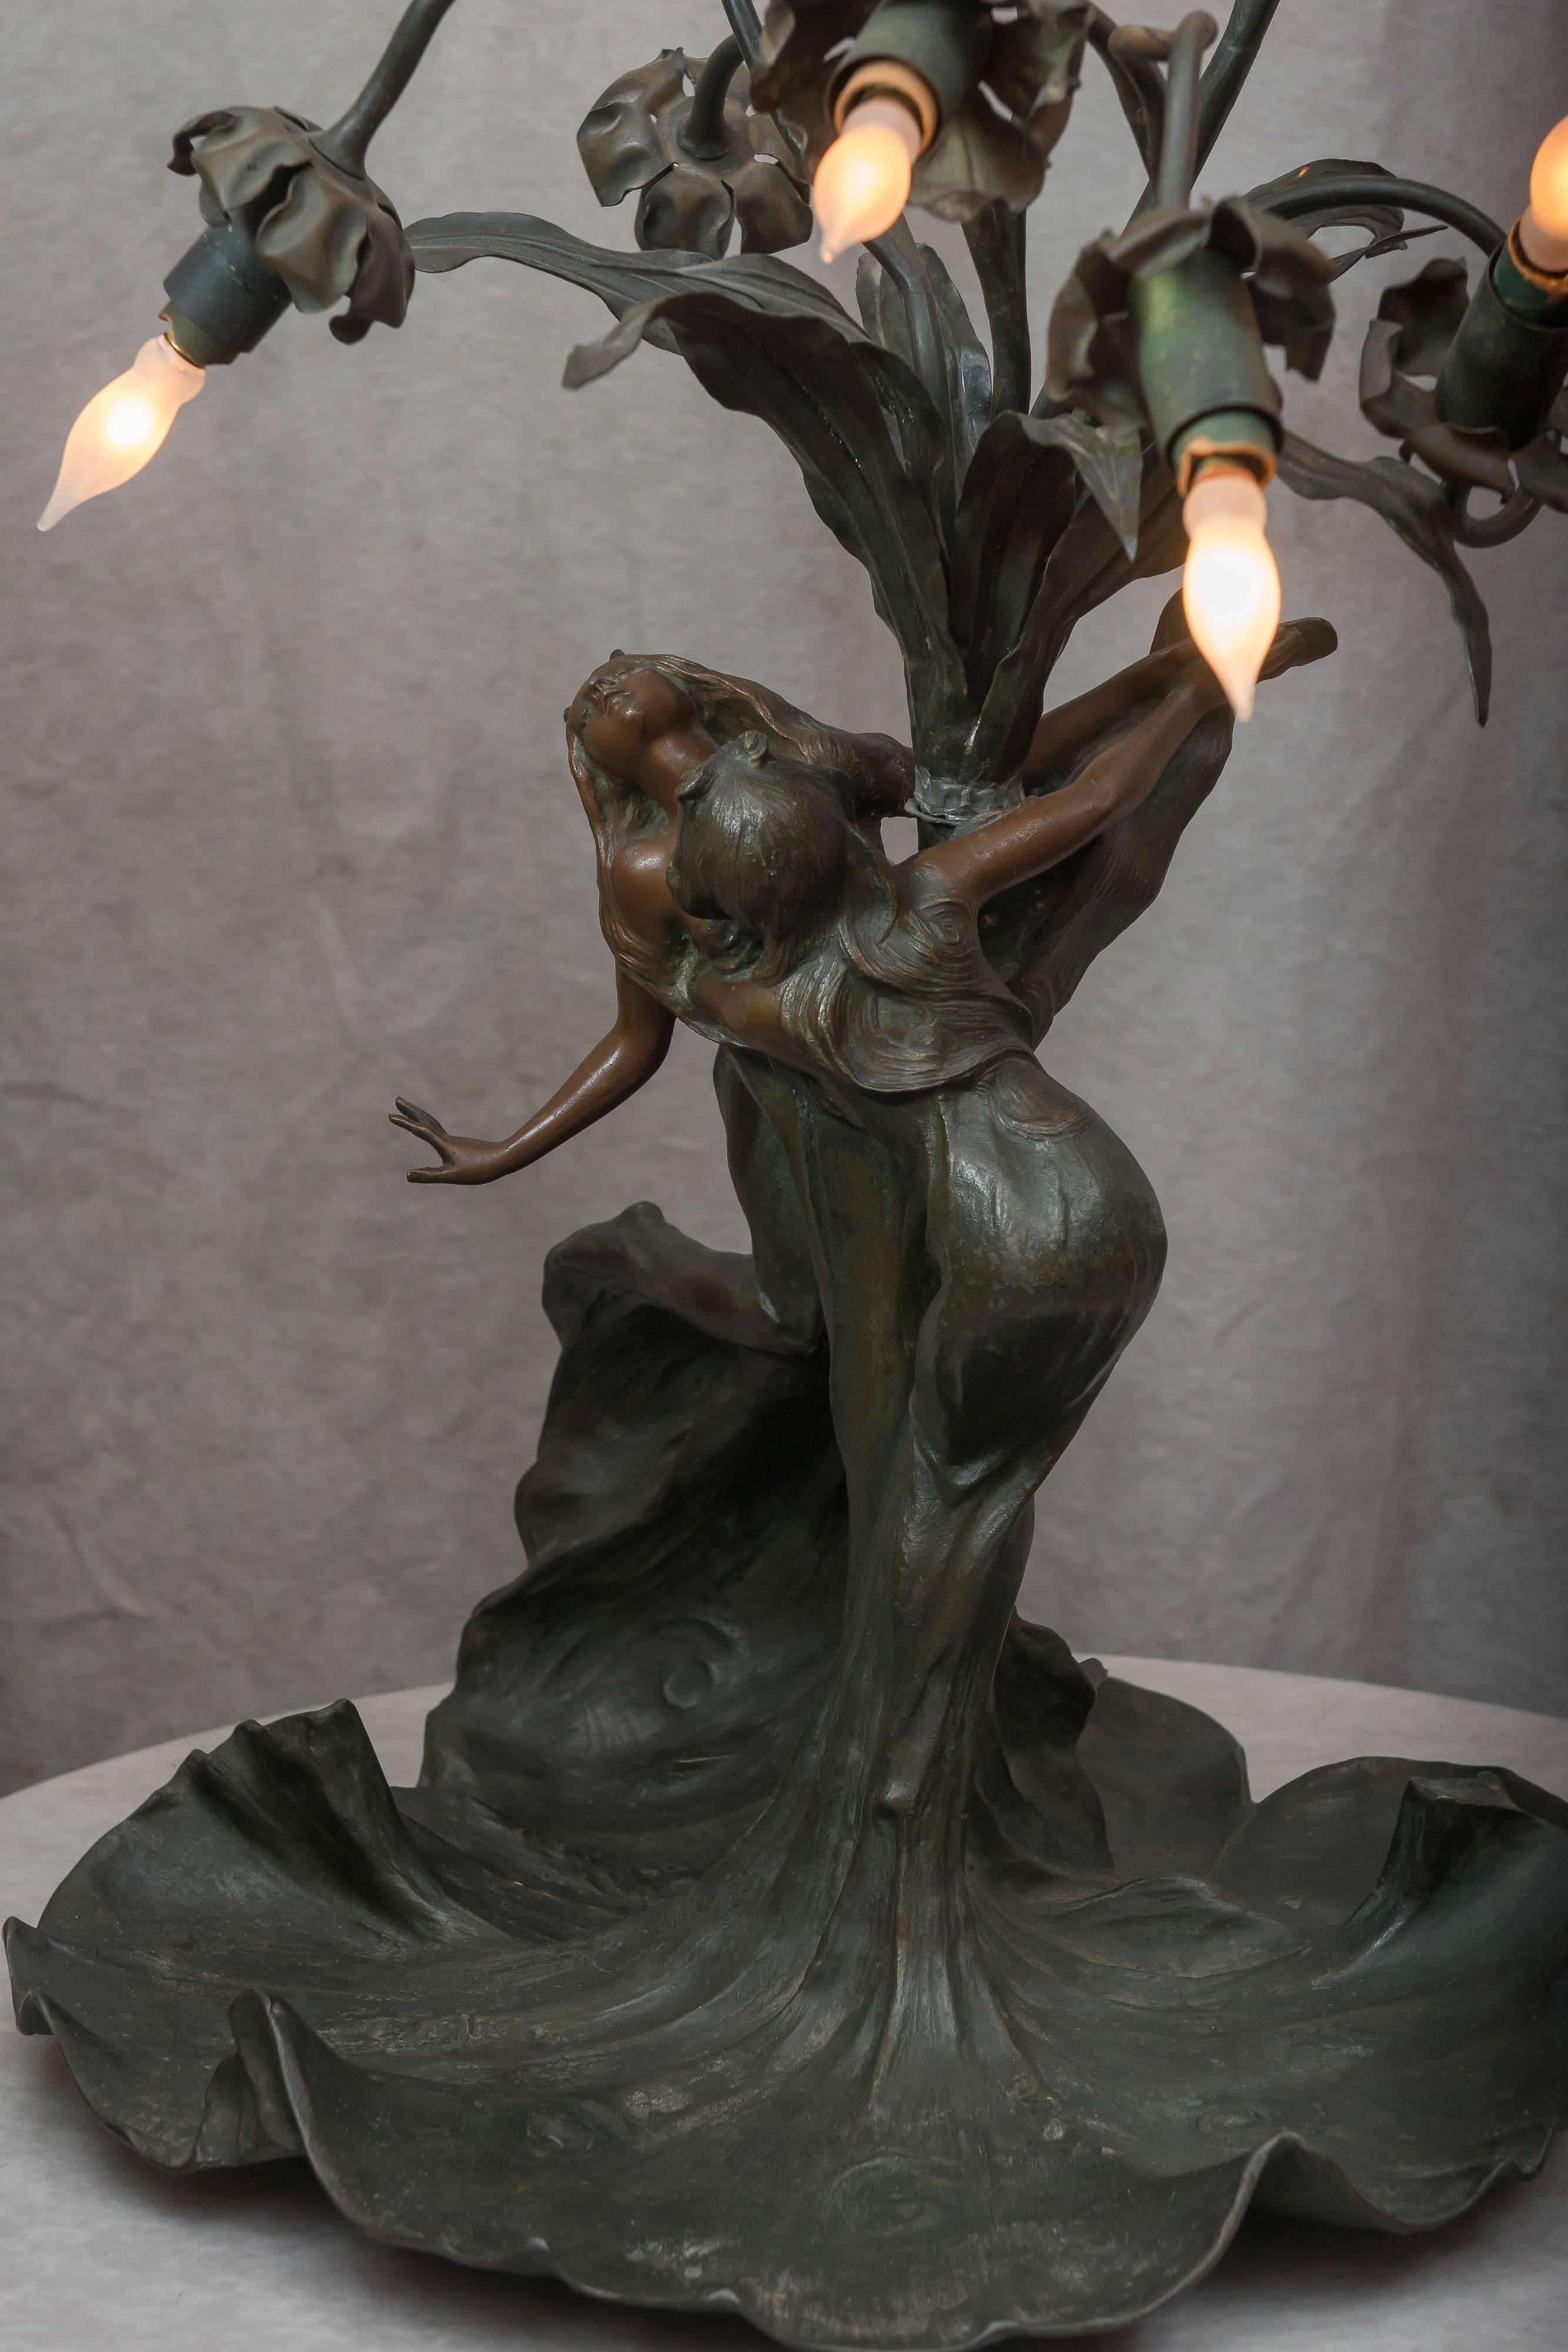 Early 20th Century French Art Nouveau Period Nine-Light Sculptural Table Lamp, ca. 1900 Signed Sola